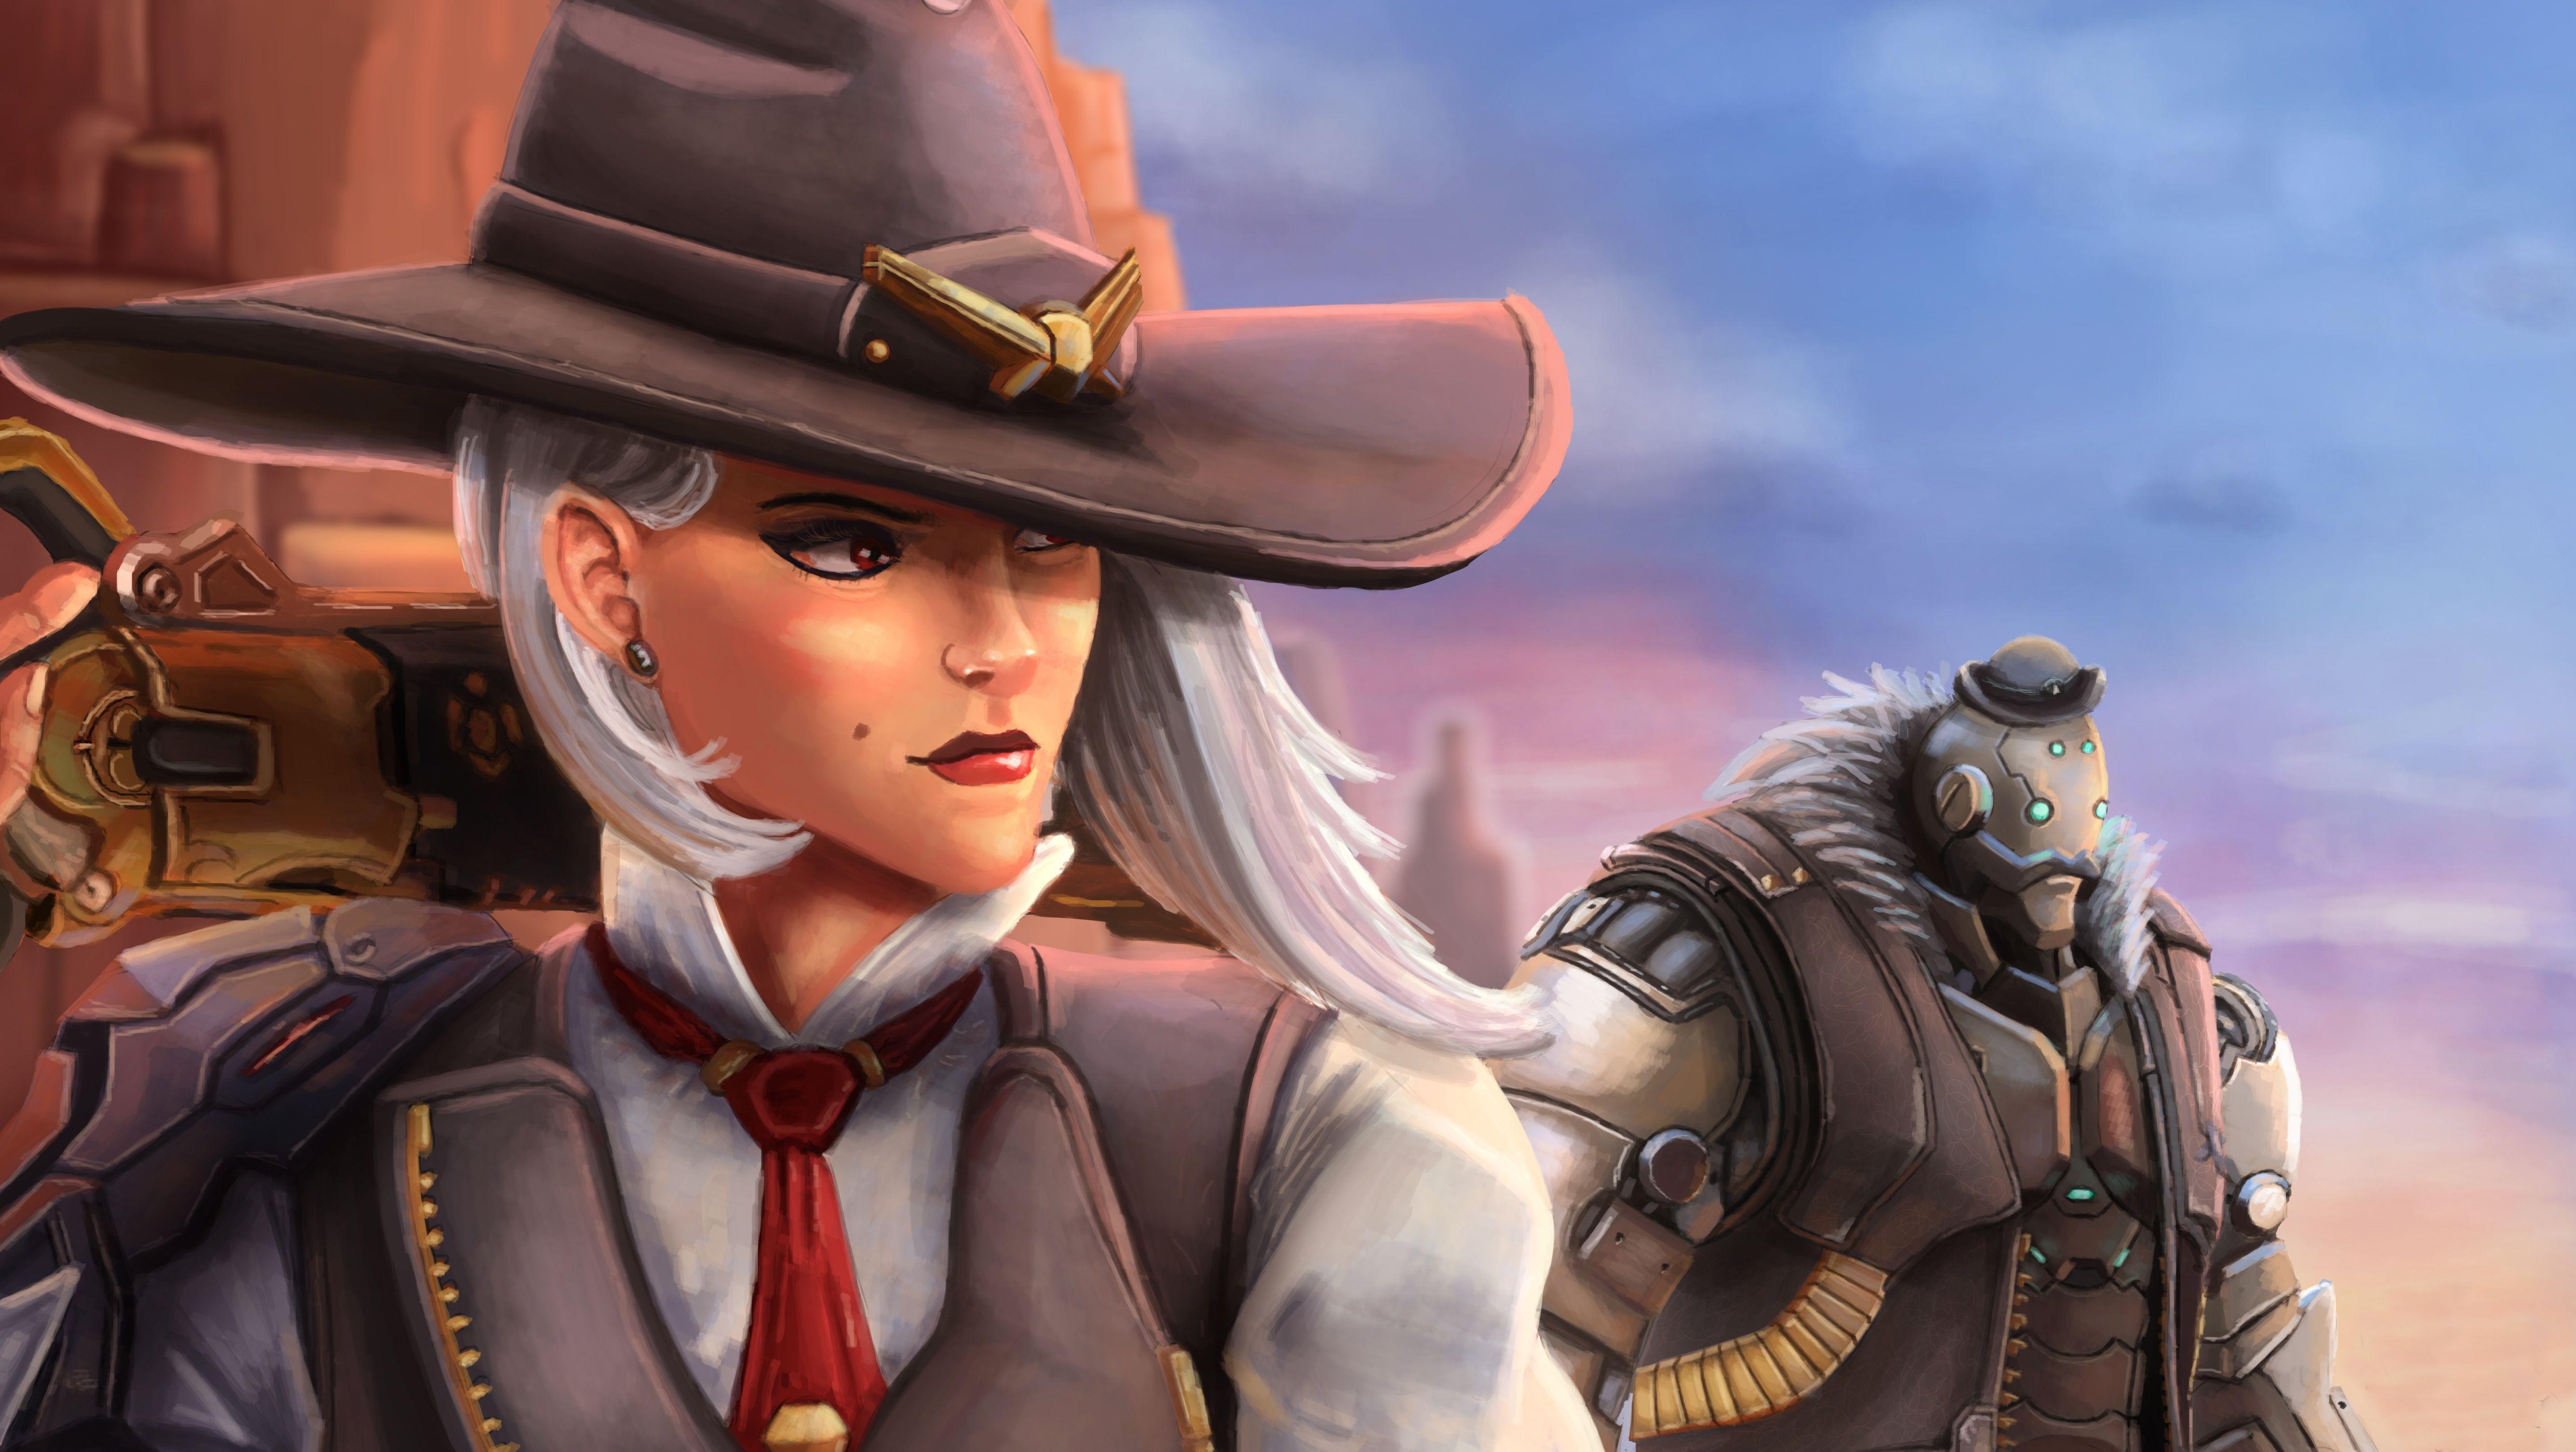 504264 1920x1080 Ashe Overwatch Overwatch wallpaper PNG  Rare Gallery  HD Wallpapers